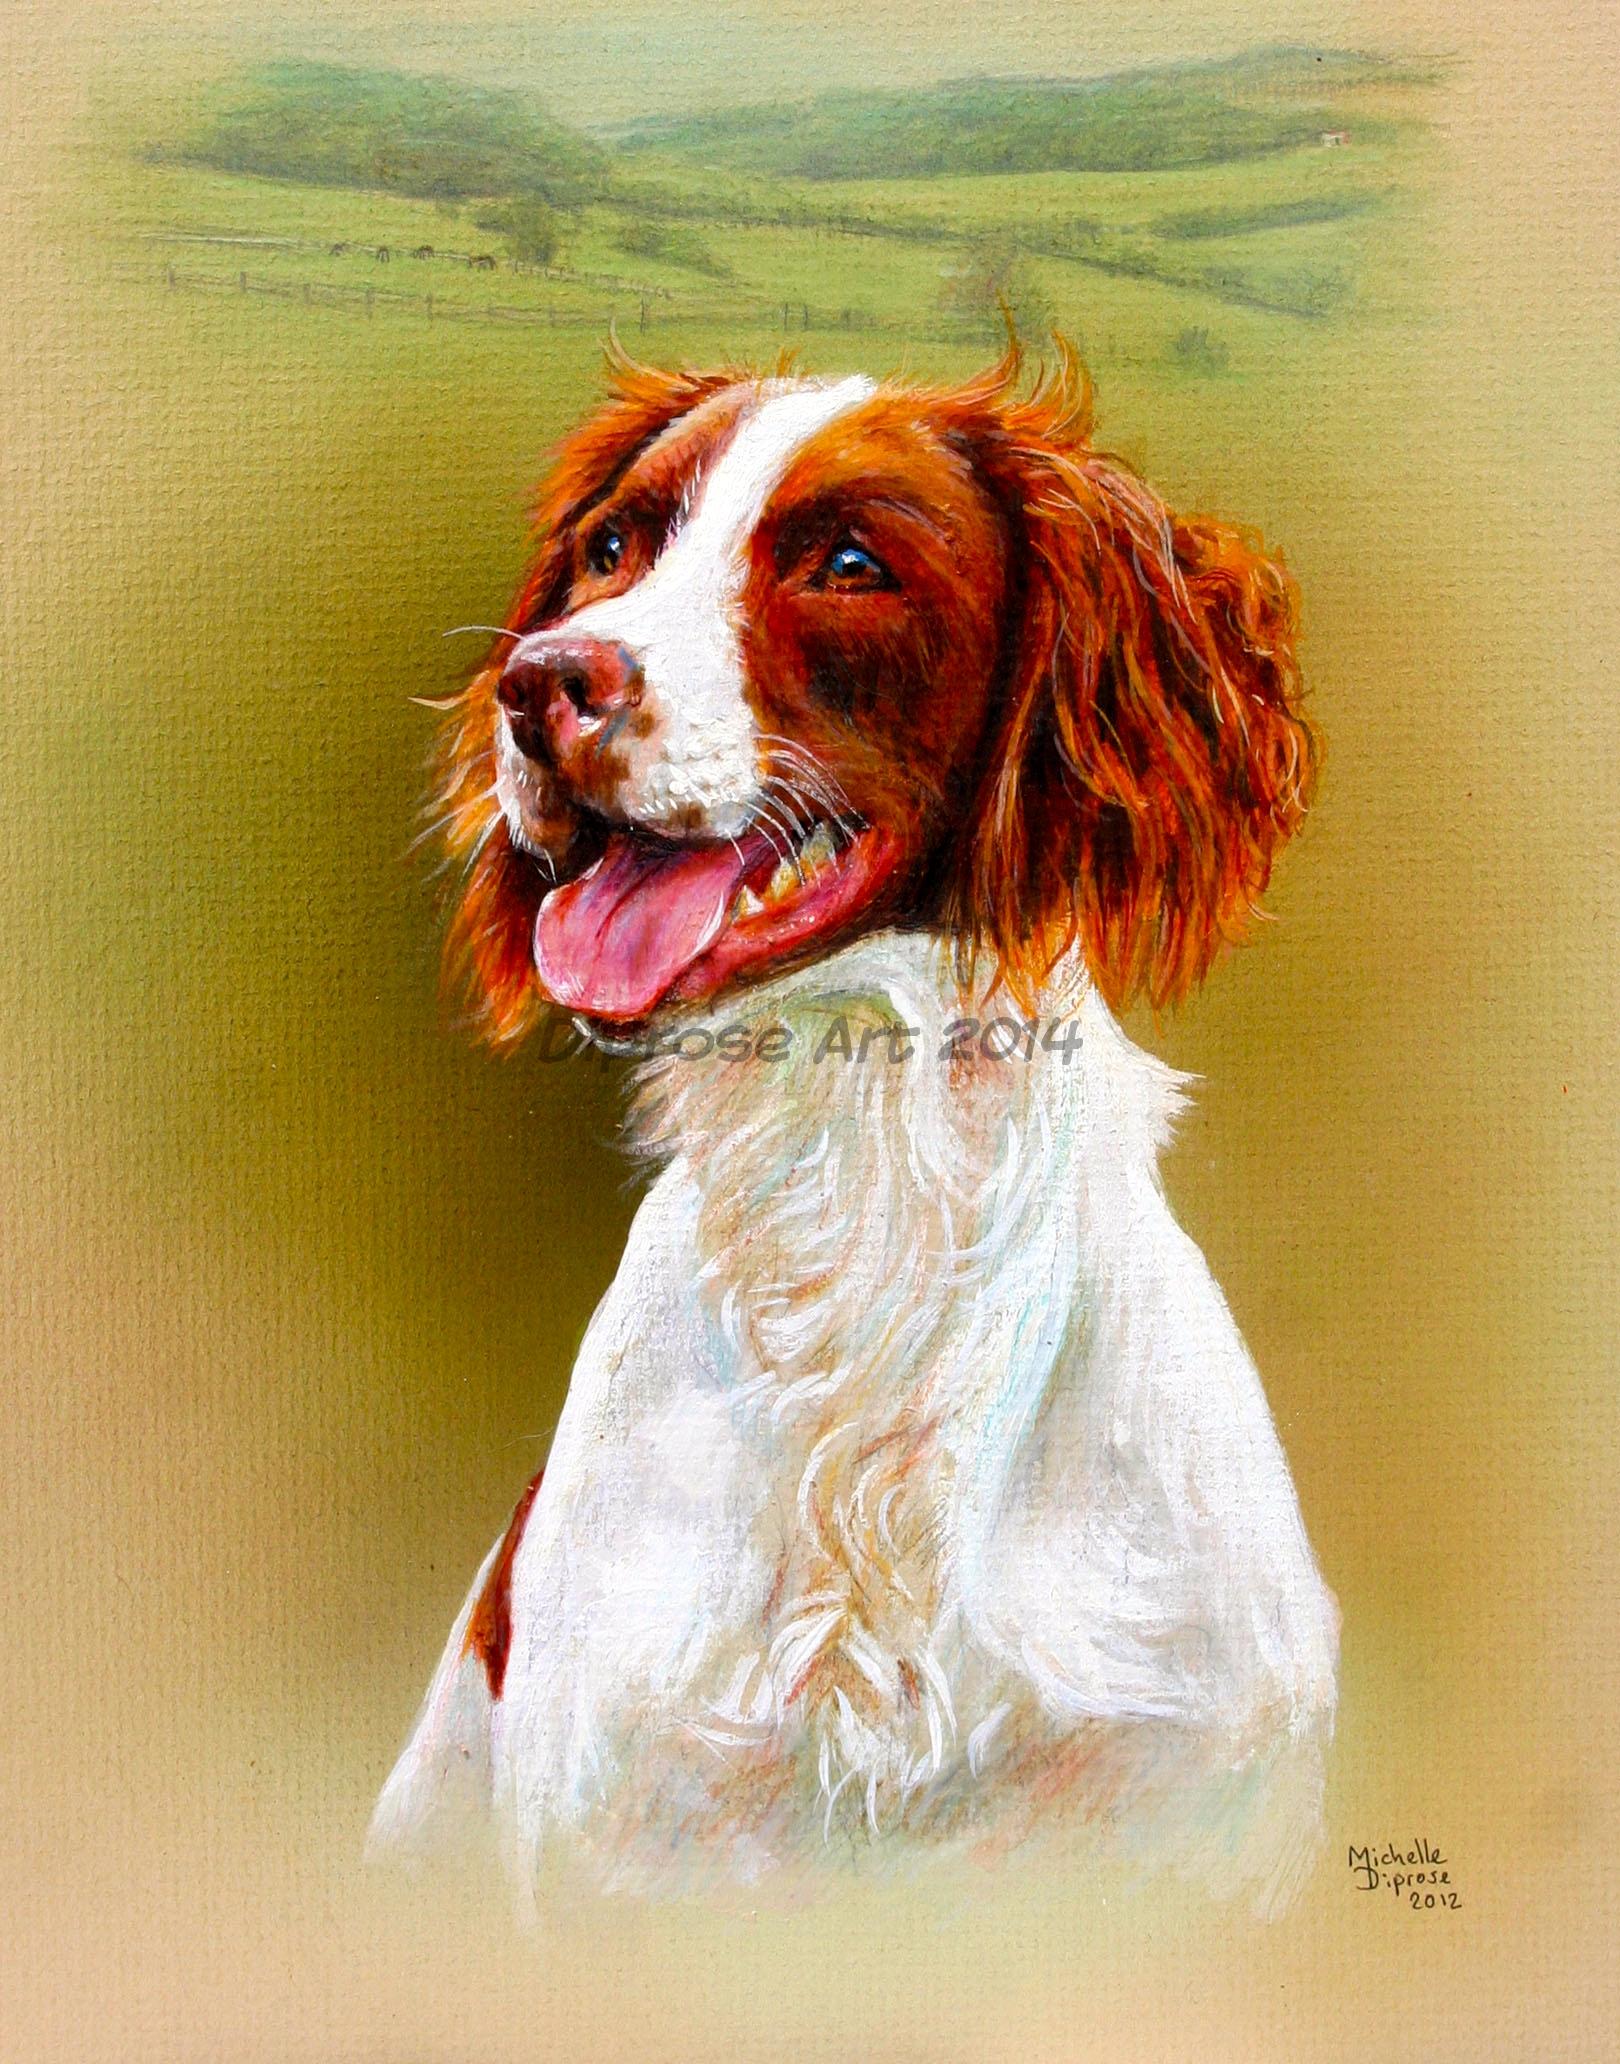 Acrylics on board - approx A4 - pet dog portrait - This little girl is a real live wire - she is a lovely active liver and white springer and her owner wanted her painted in the setting of the beautiful countryside which is her home.